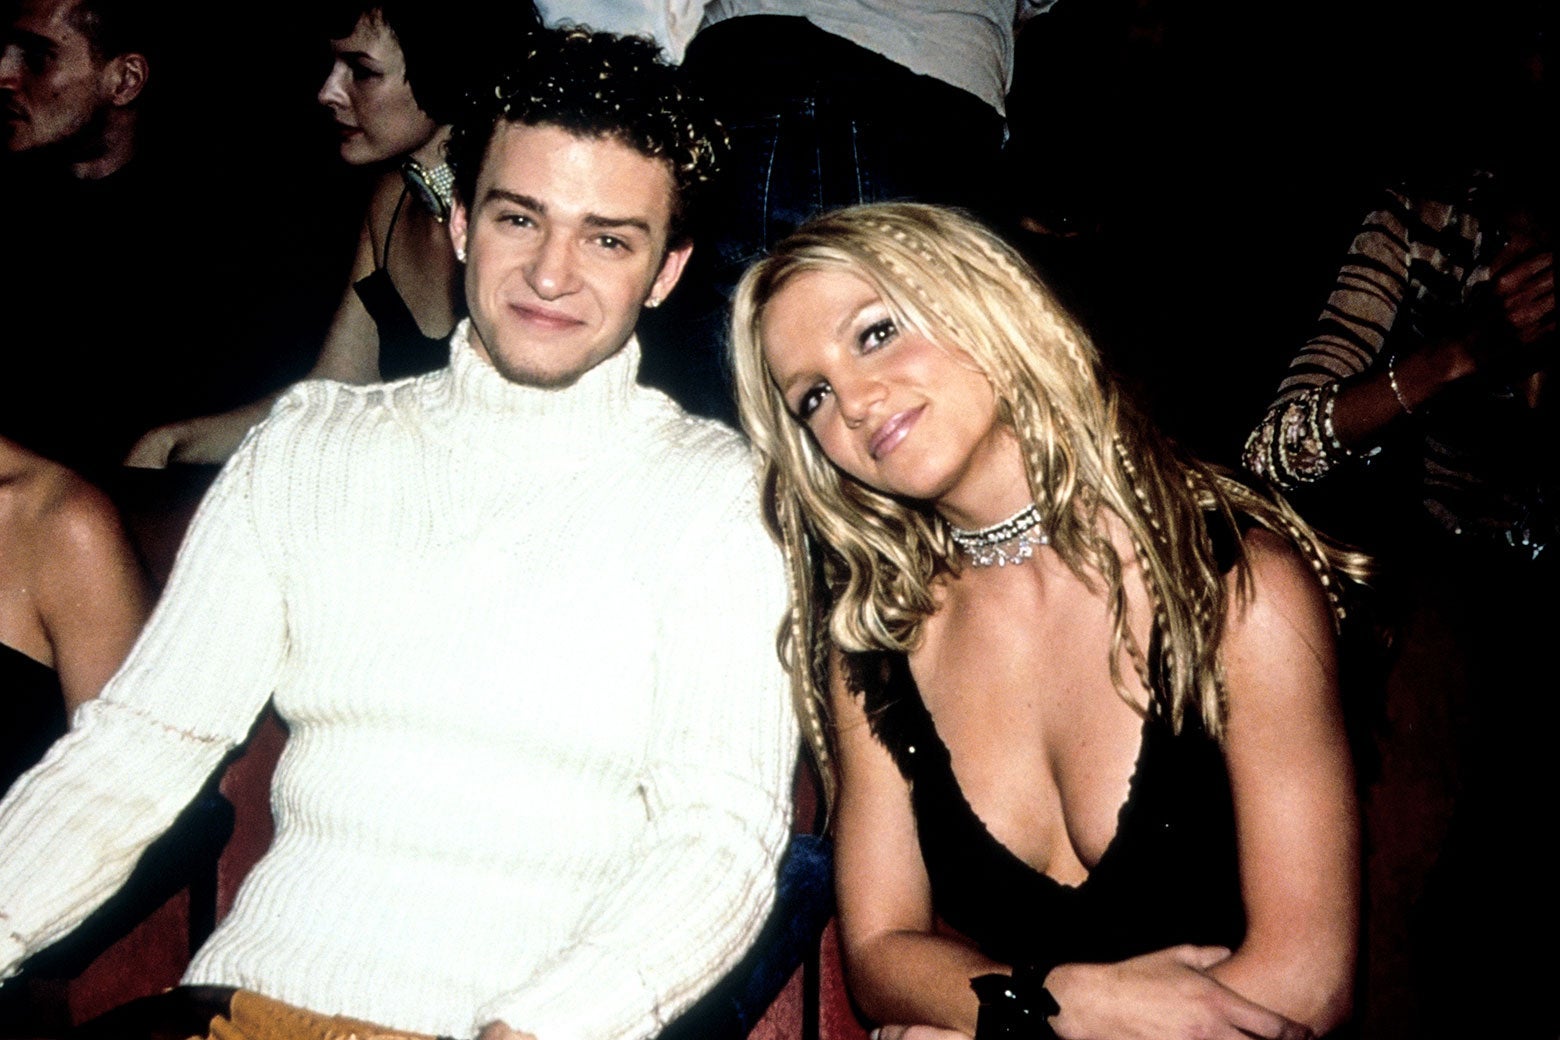 Justin in a white turtleneck sweater and Britney in a low-cut black top lean toward each other while seated in the audience.